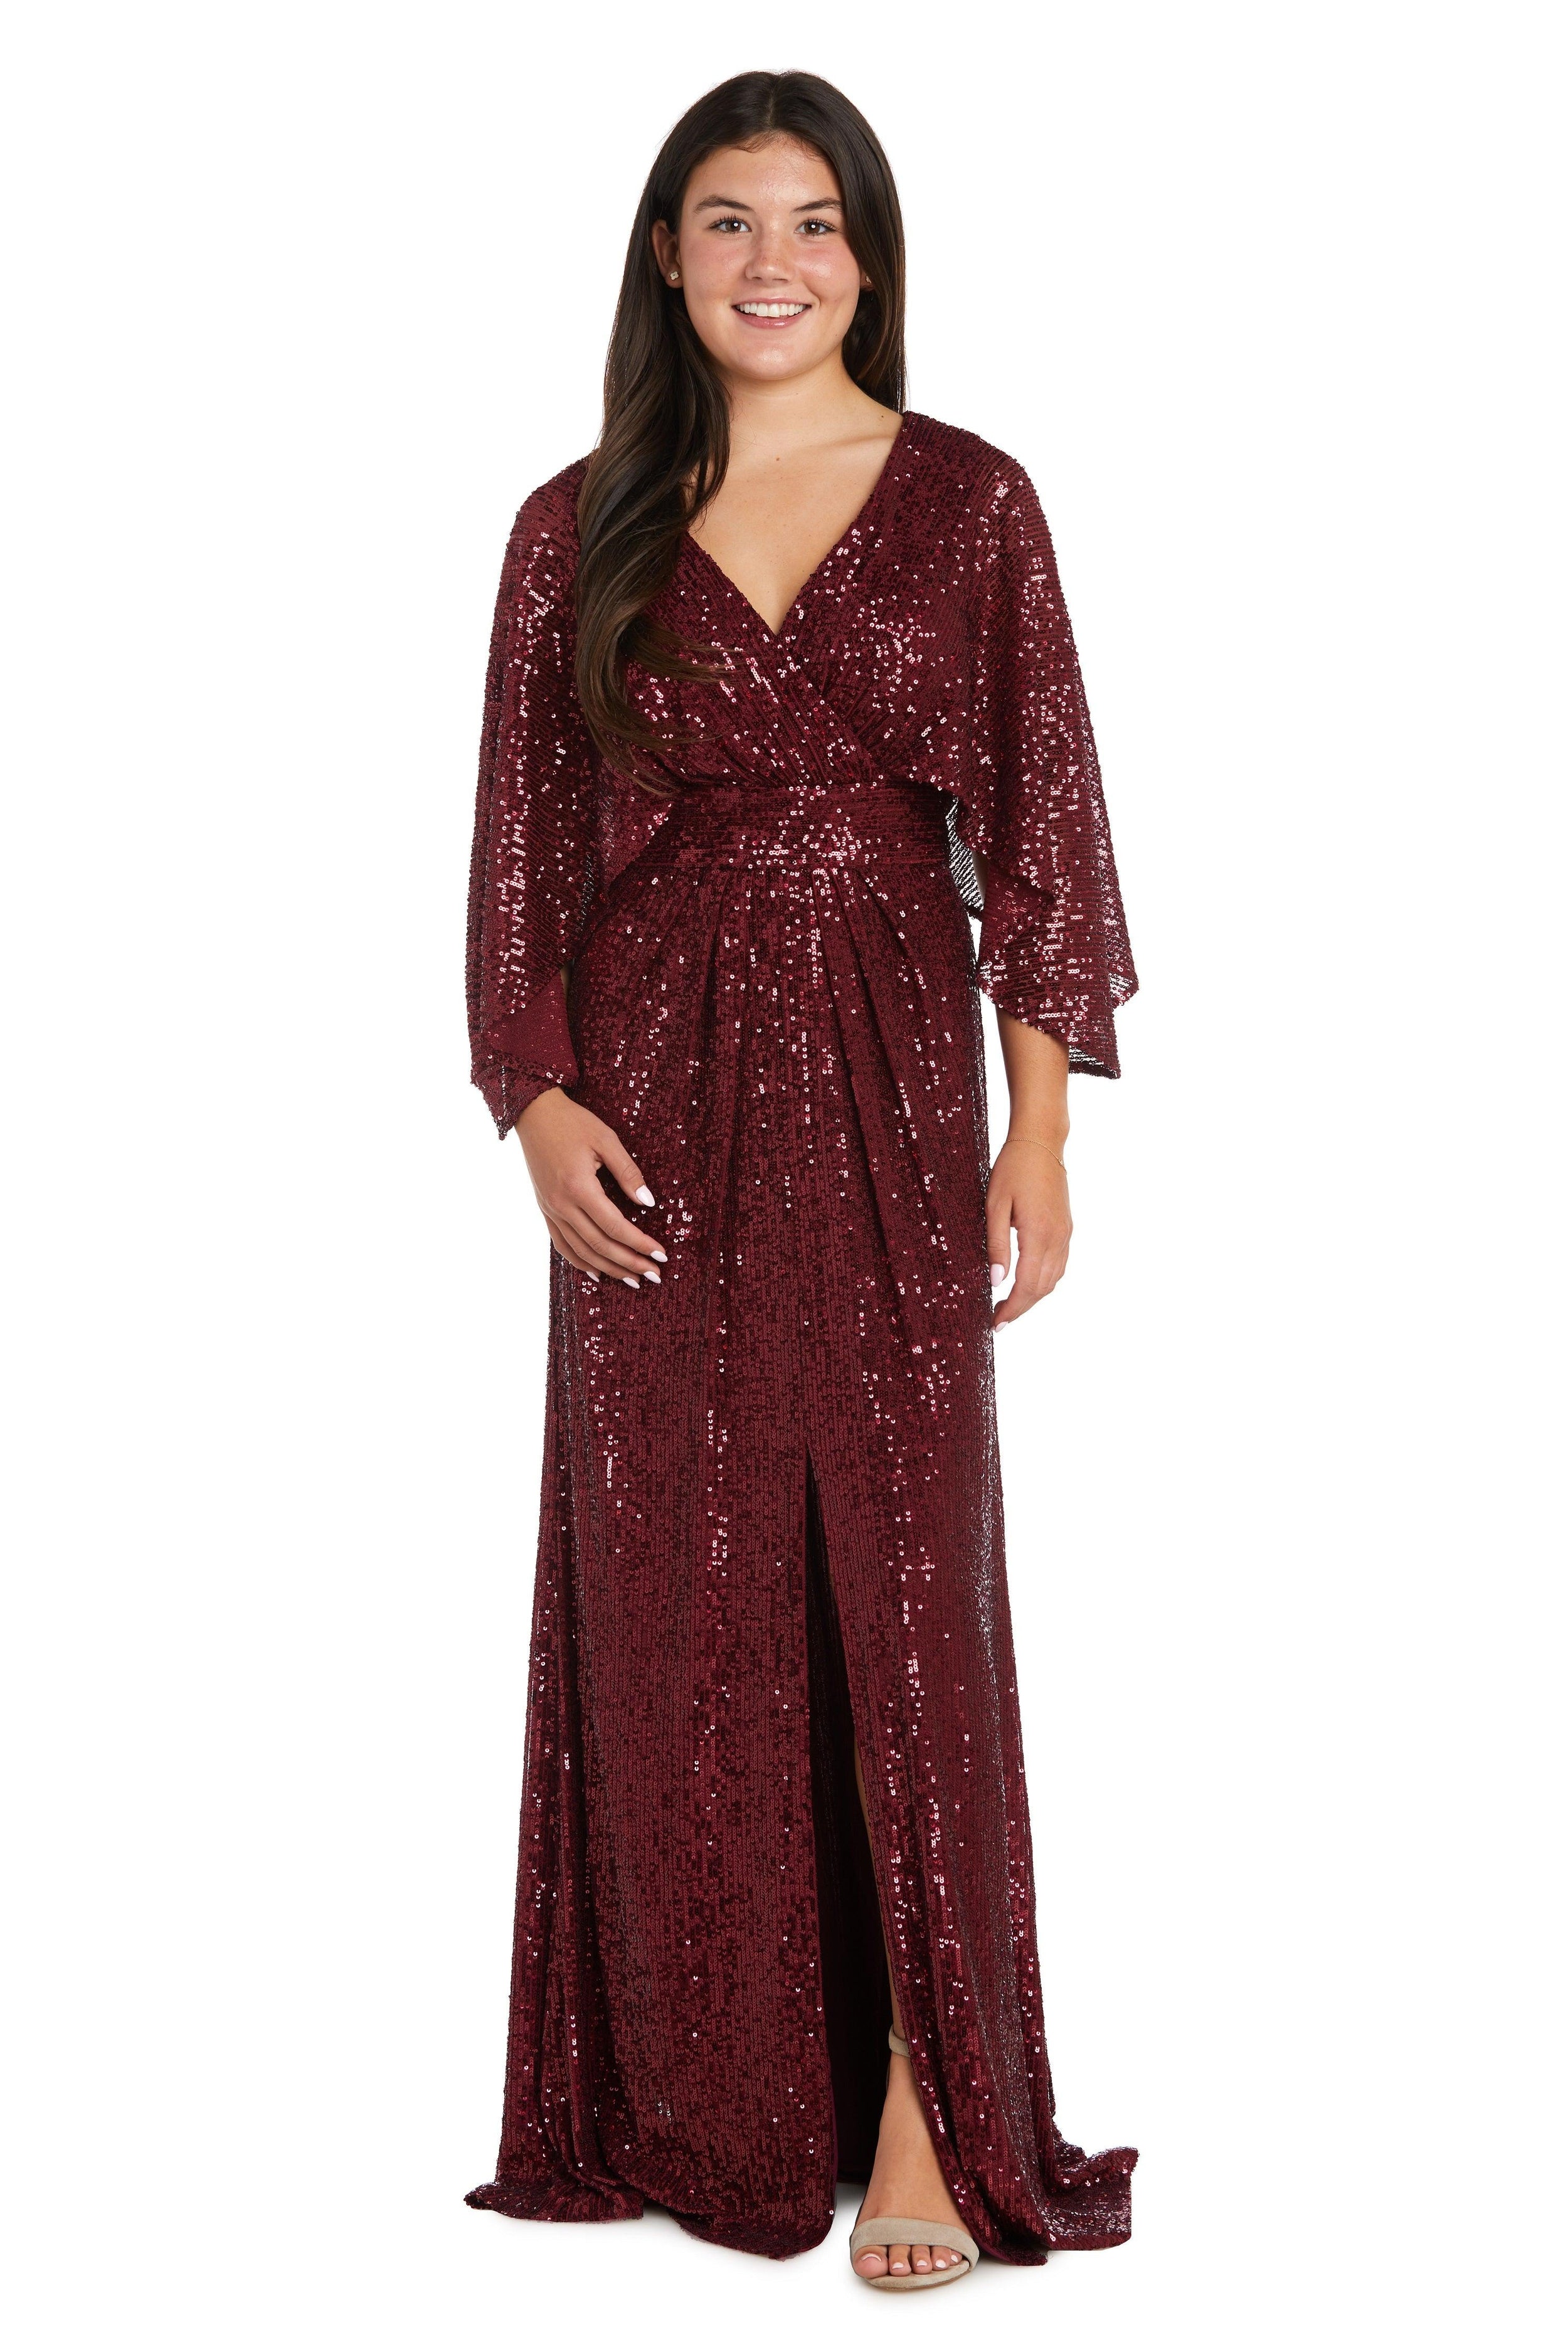 Nightway Long Sleeve Formal Evening Gown 22169 - The Dress Outlet